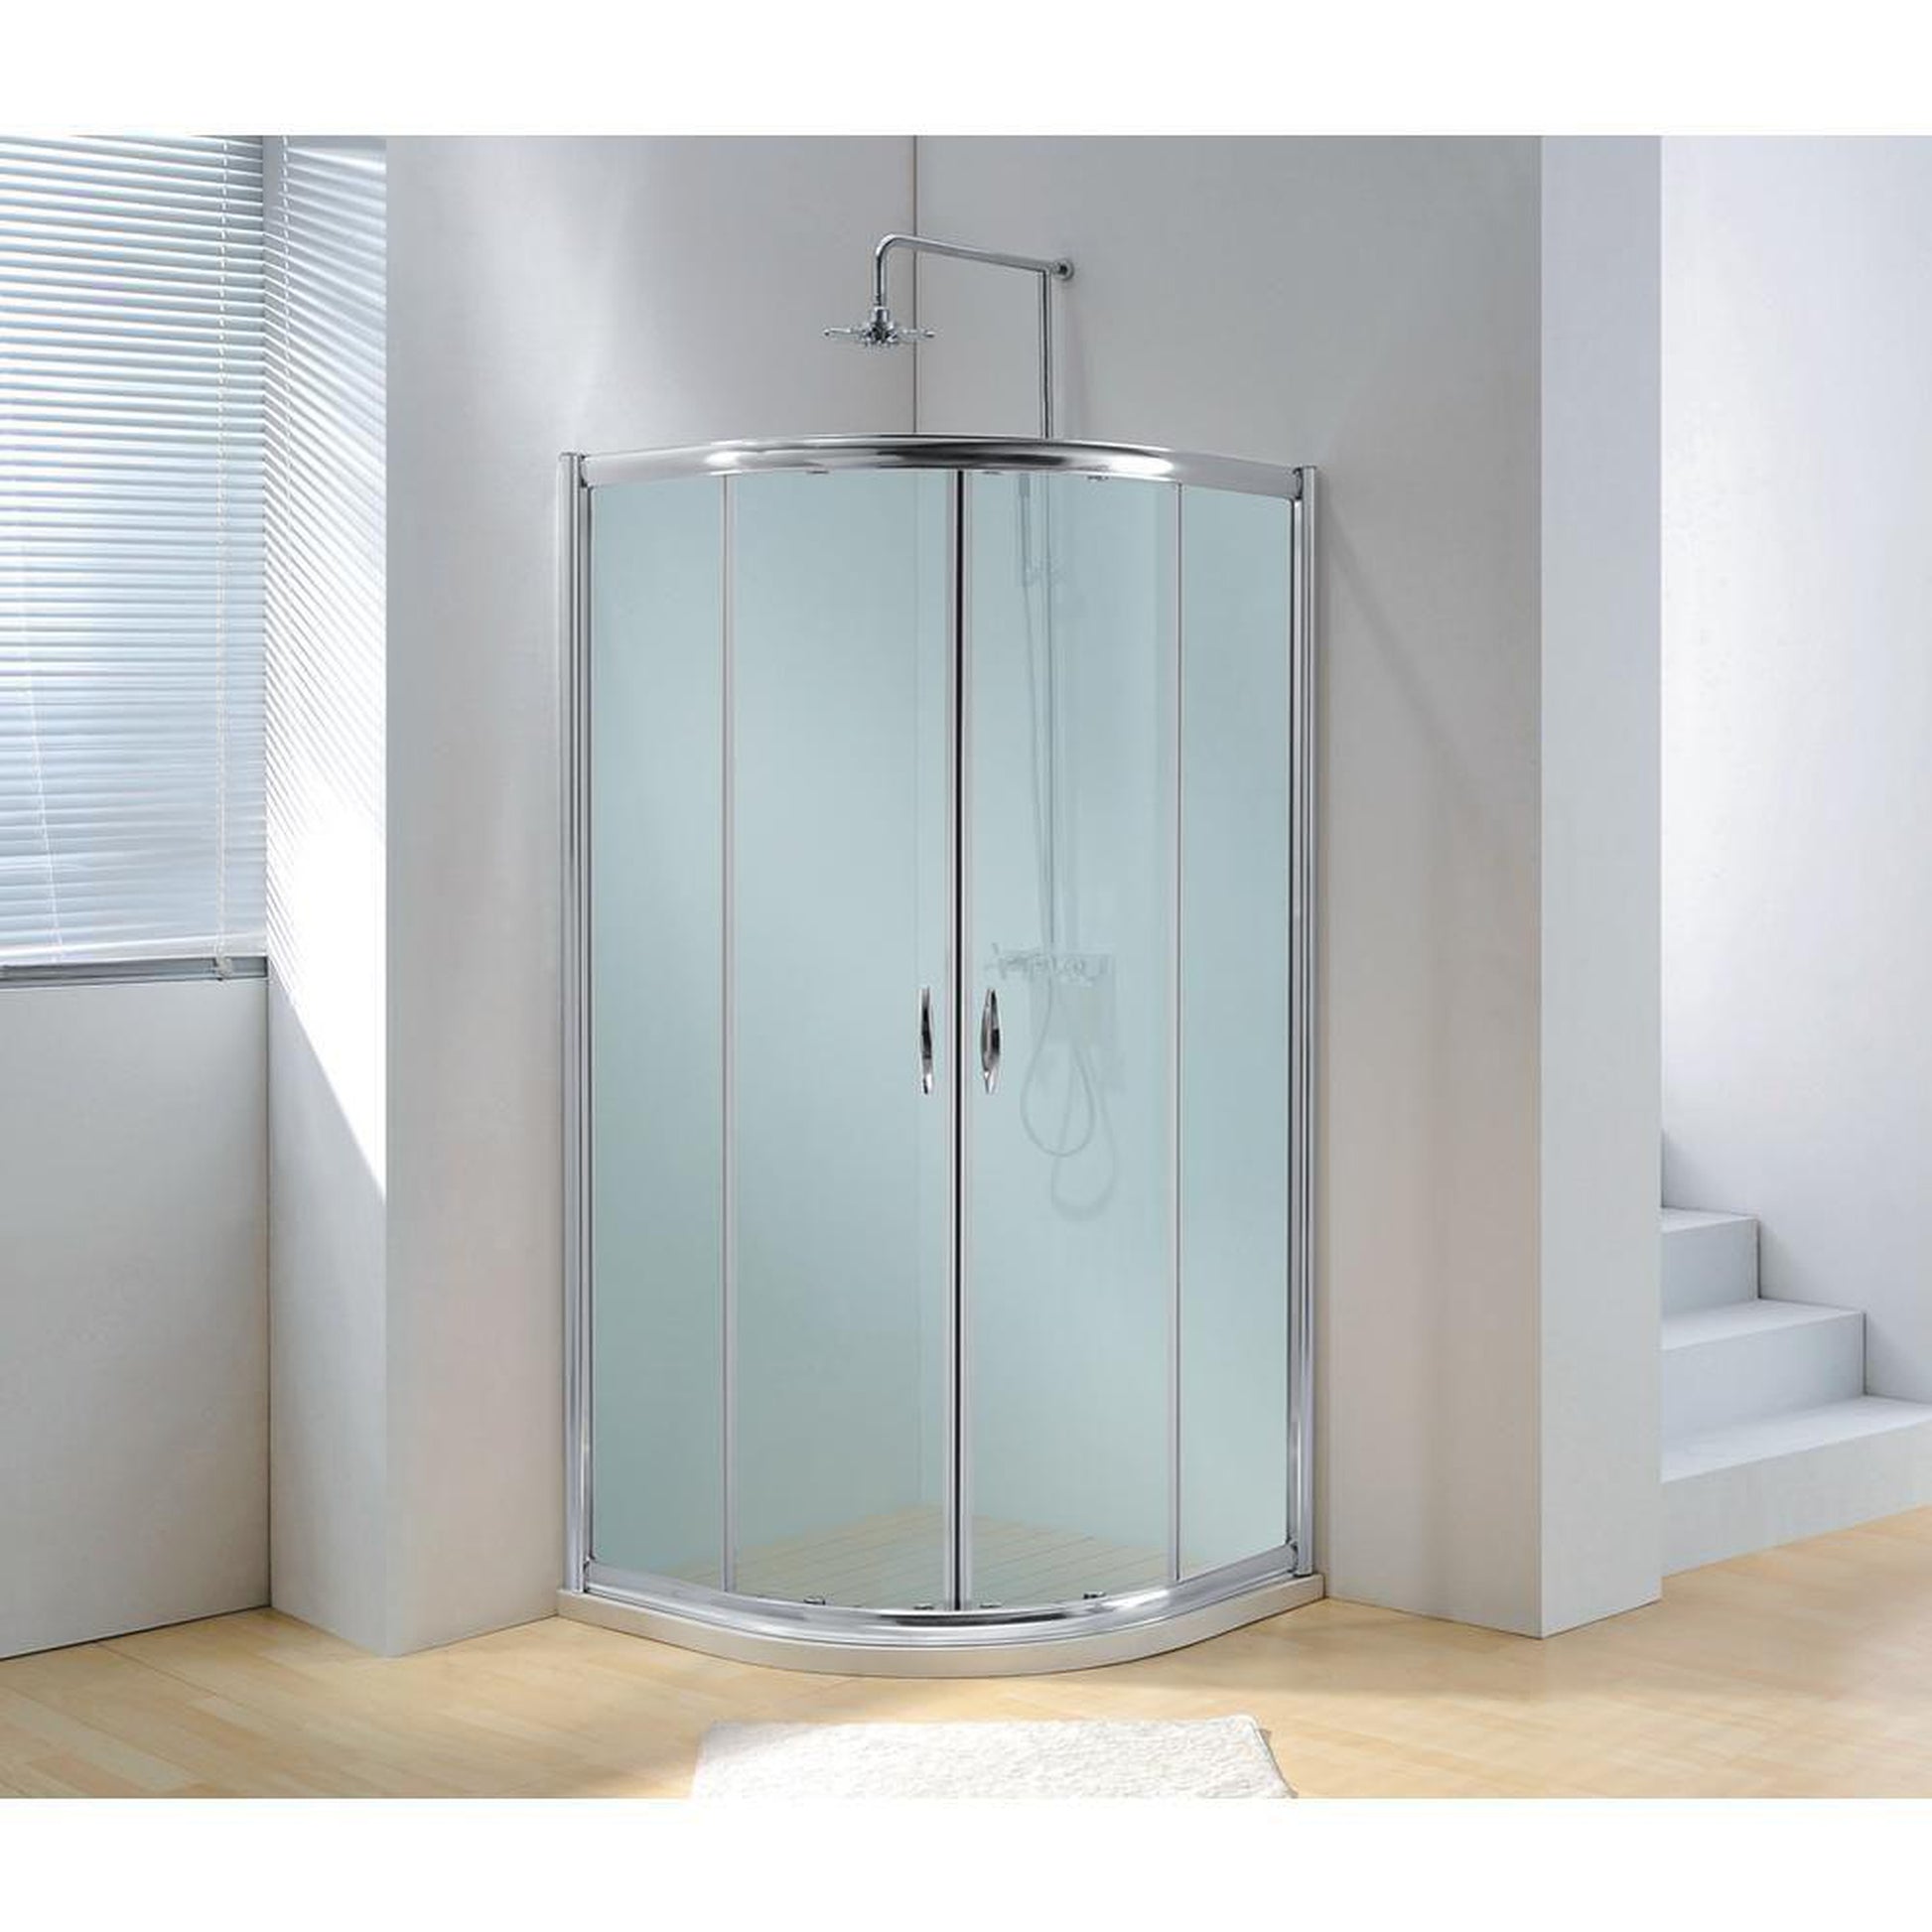 DreamWerks Framed Sliding Shower Enclosure Frosted Glass with Chrome Handle